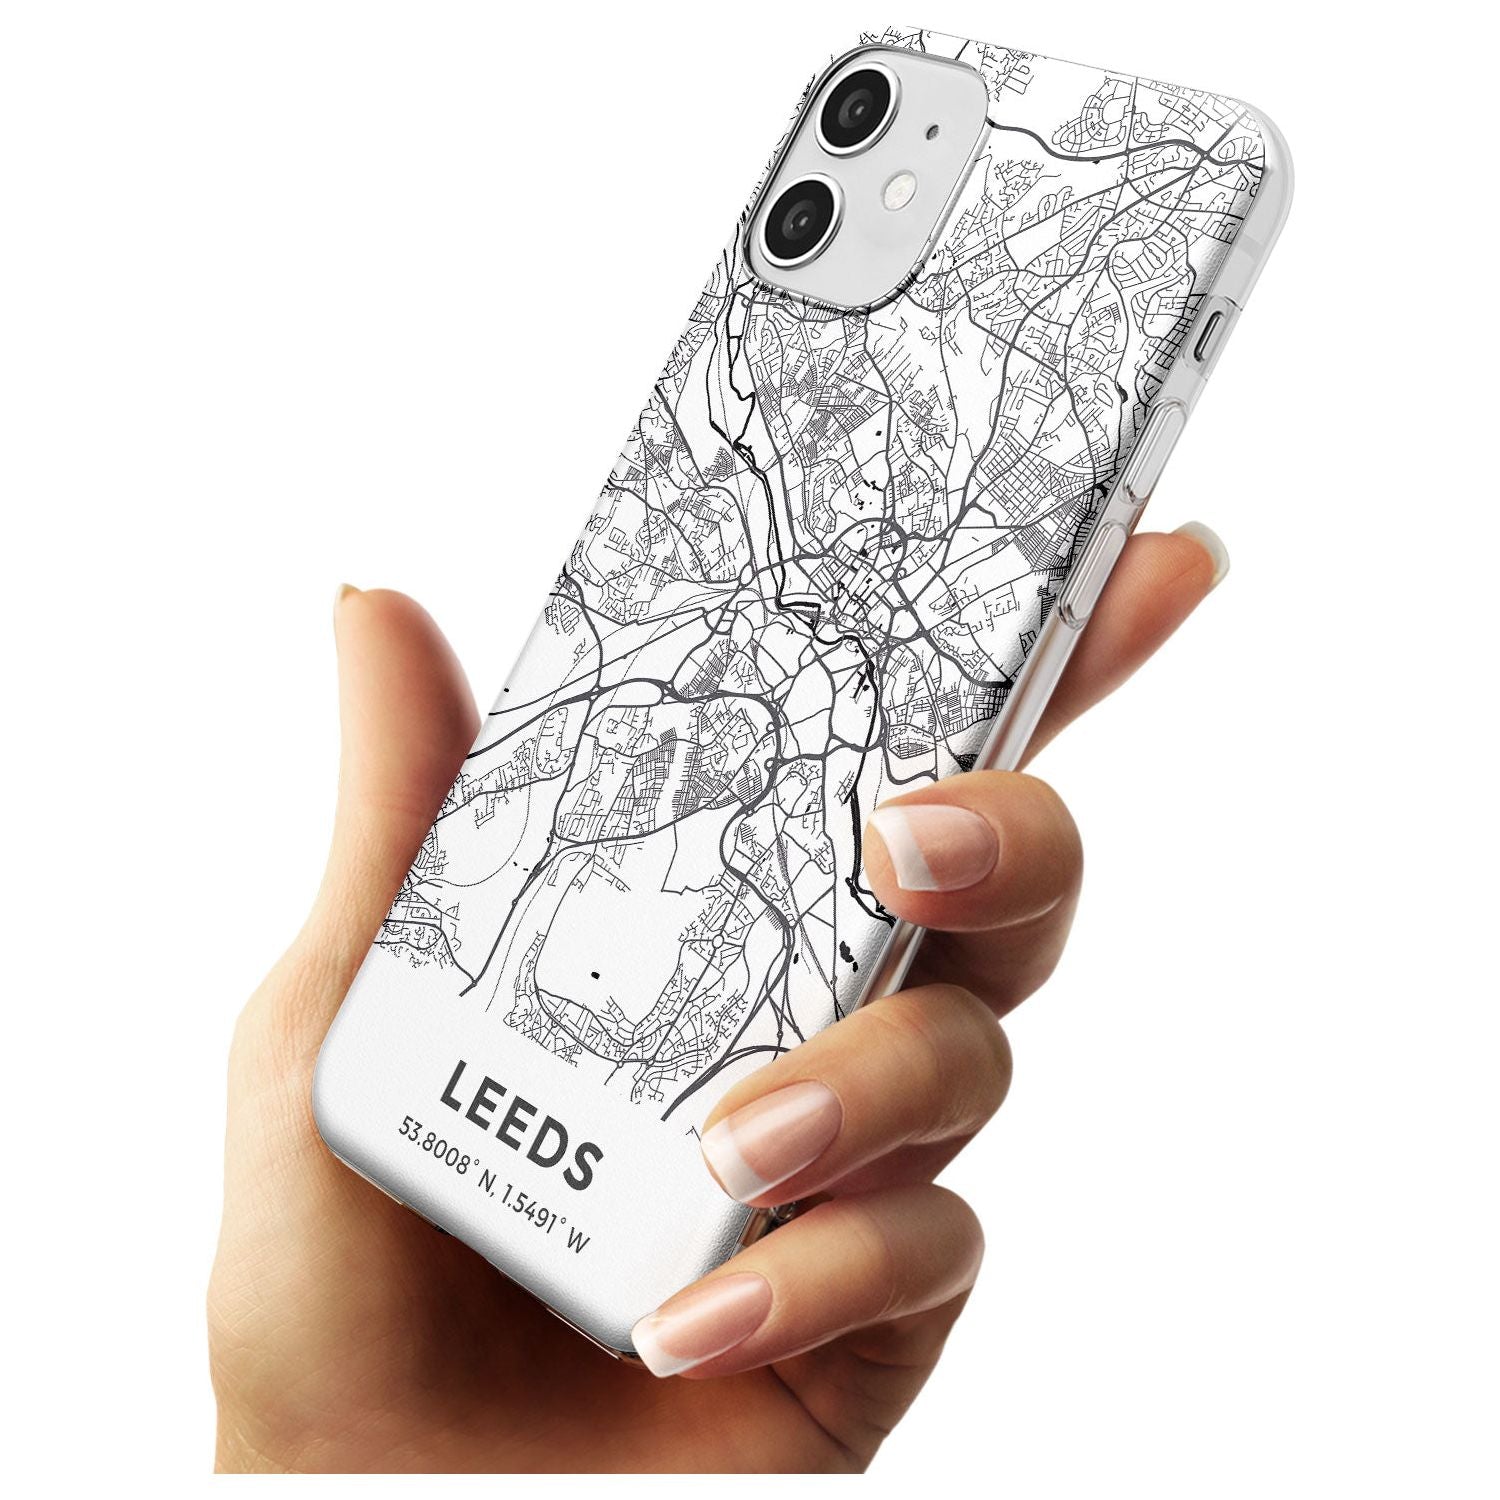 Map of Leeds, England Slim TPU Phone Case for iPhone 11